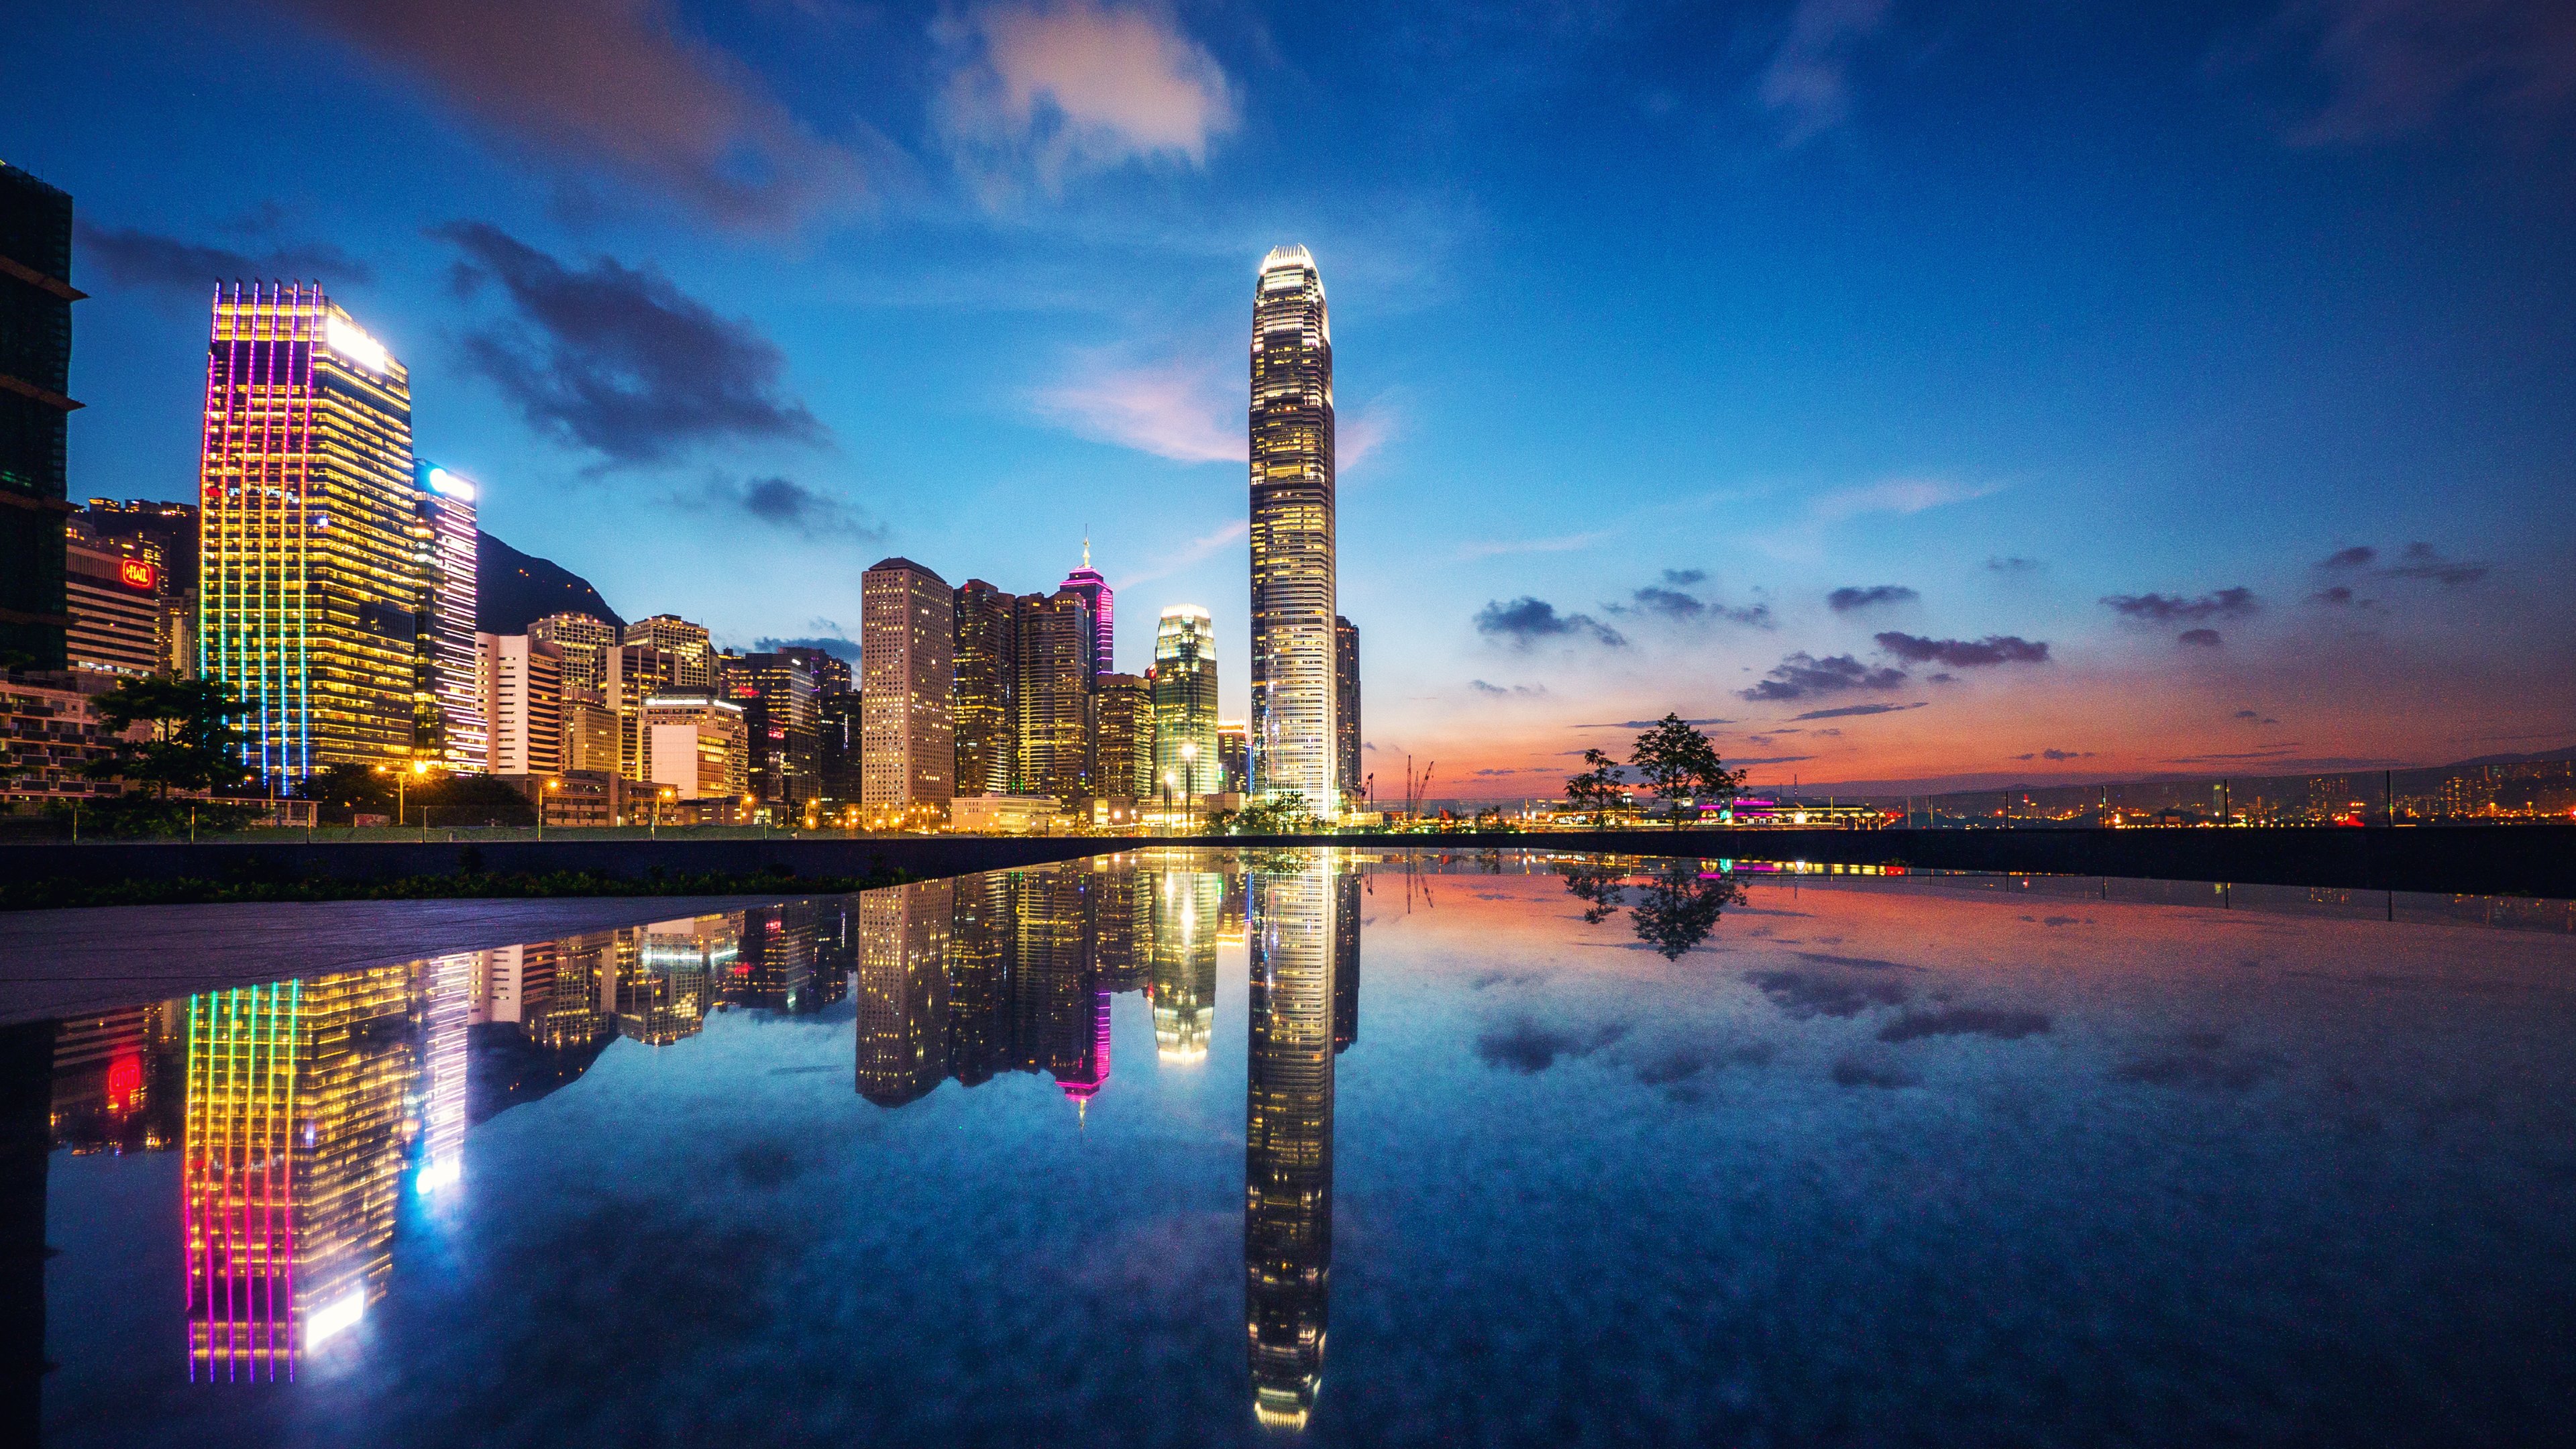 reflection, architecture, cityscape, hong kong, man made, cities, building, twilight